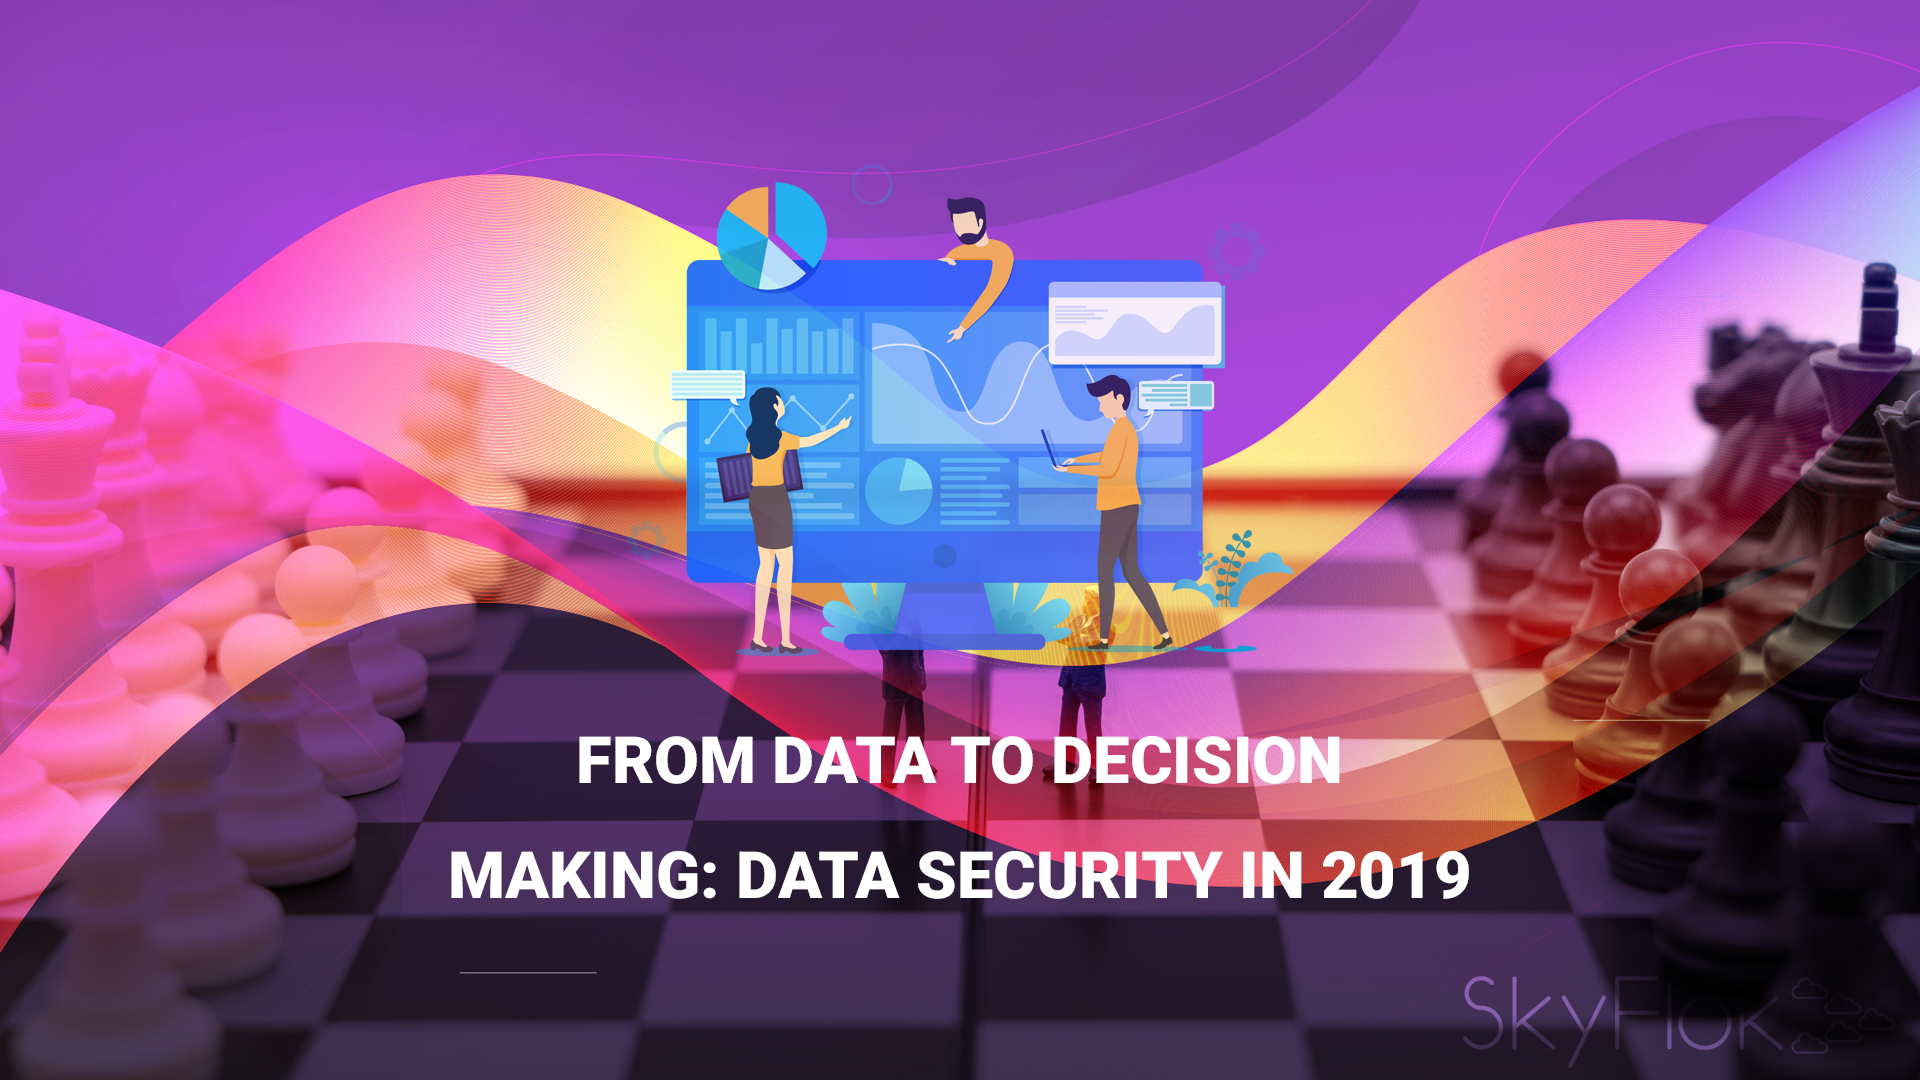 From data to decision-making: Data security in 2019